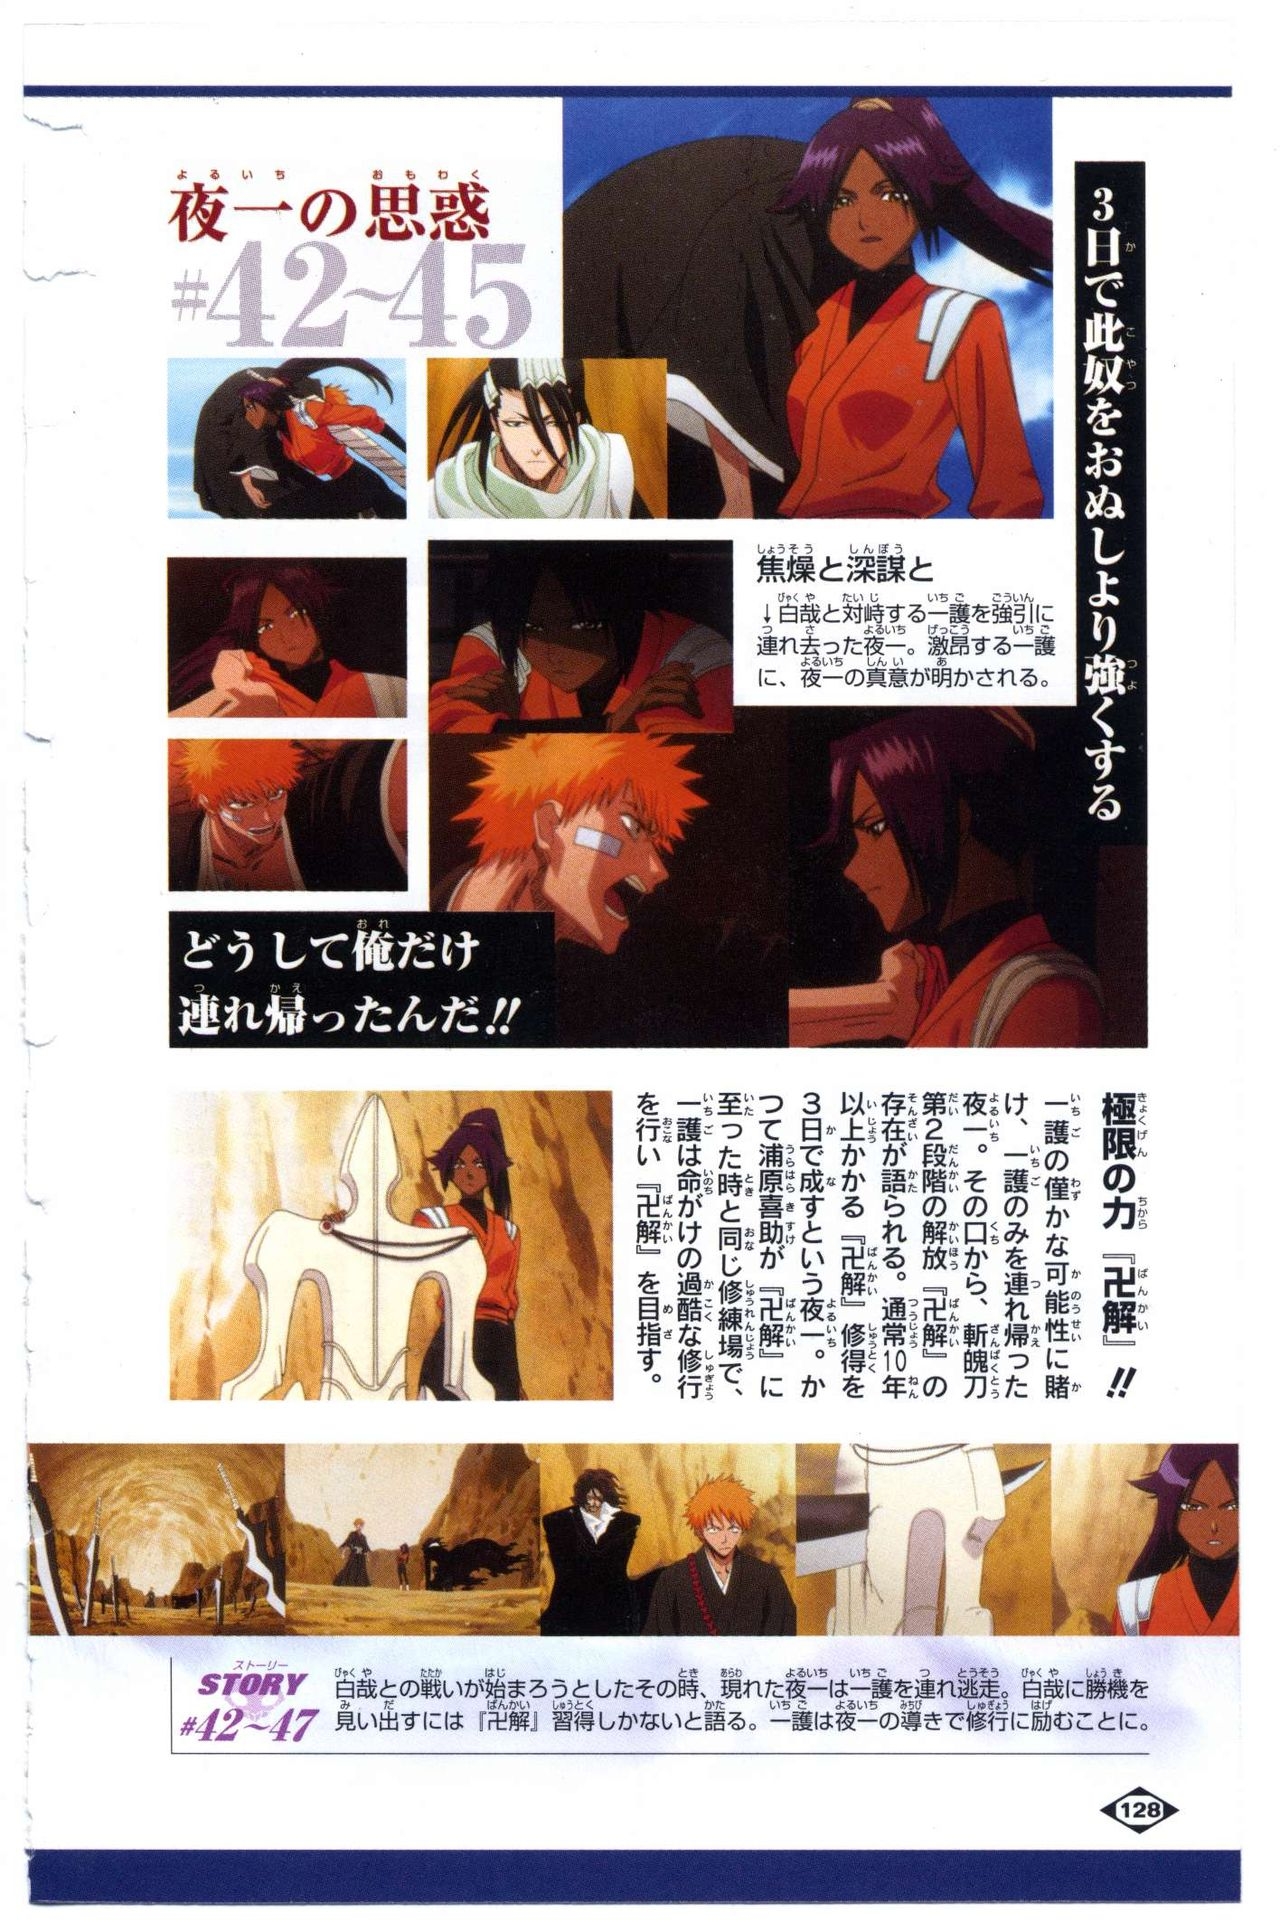 Bleach: Official Animation Book VIBEs 128